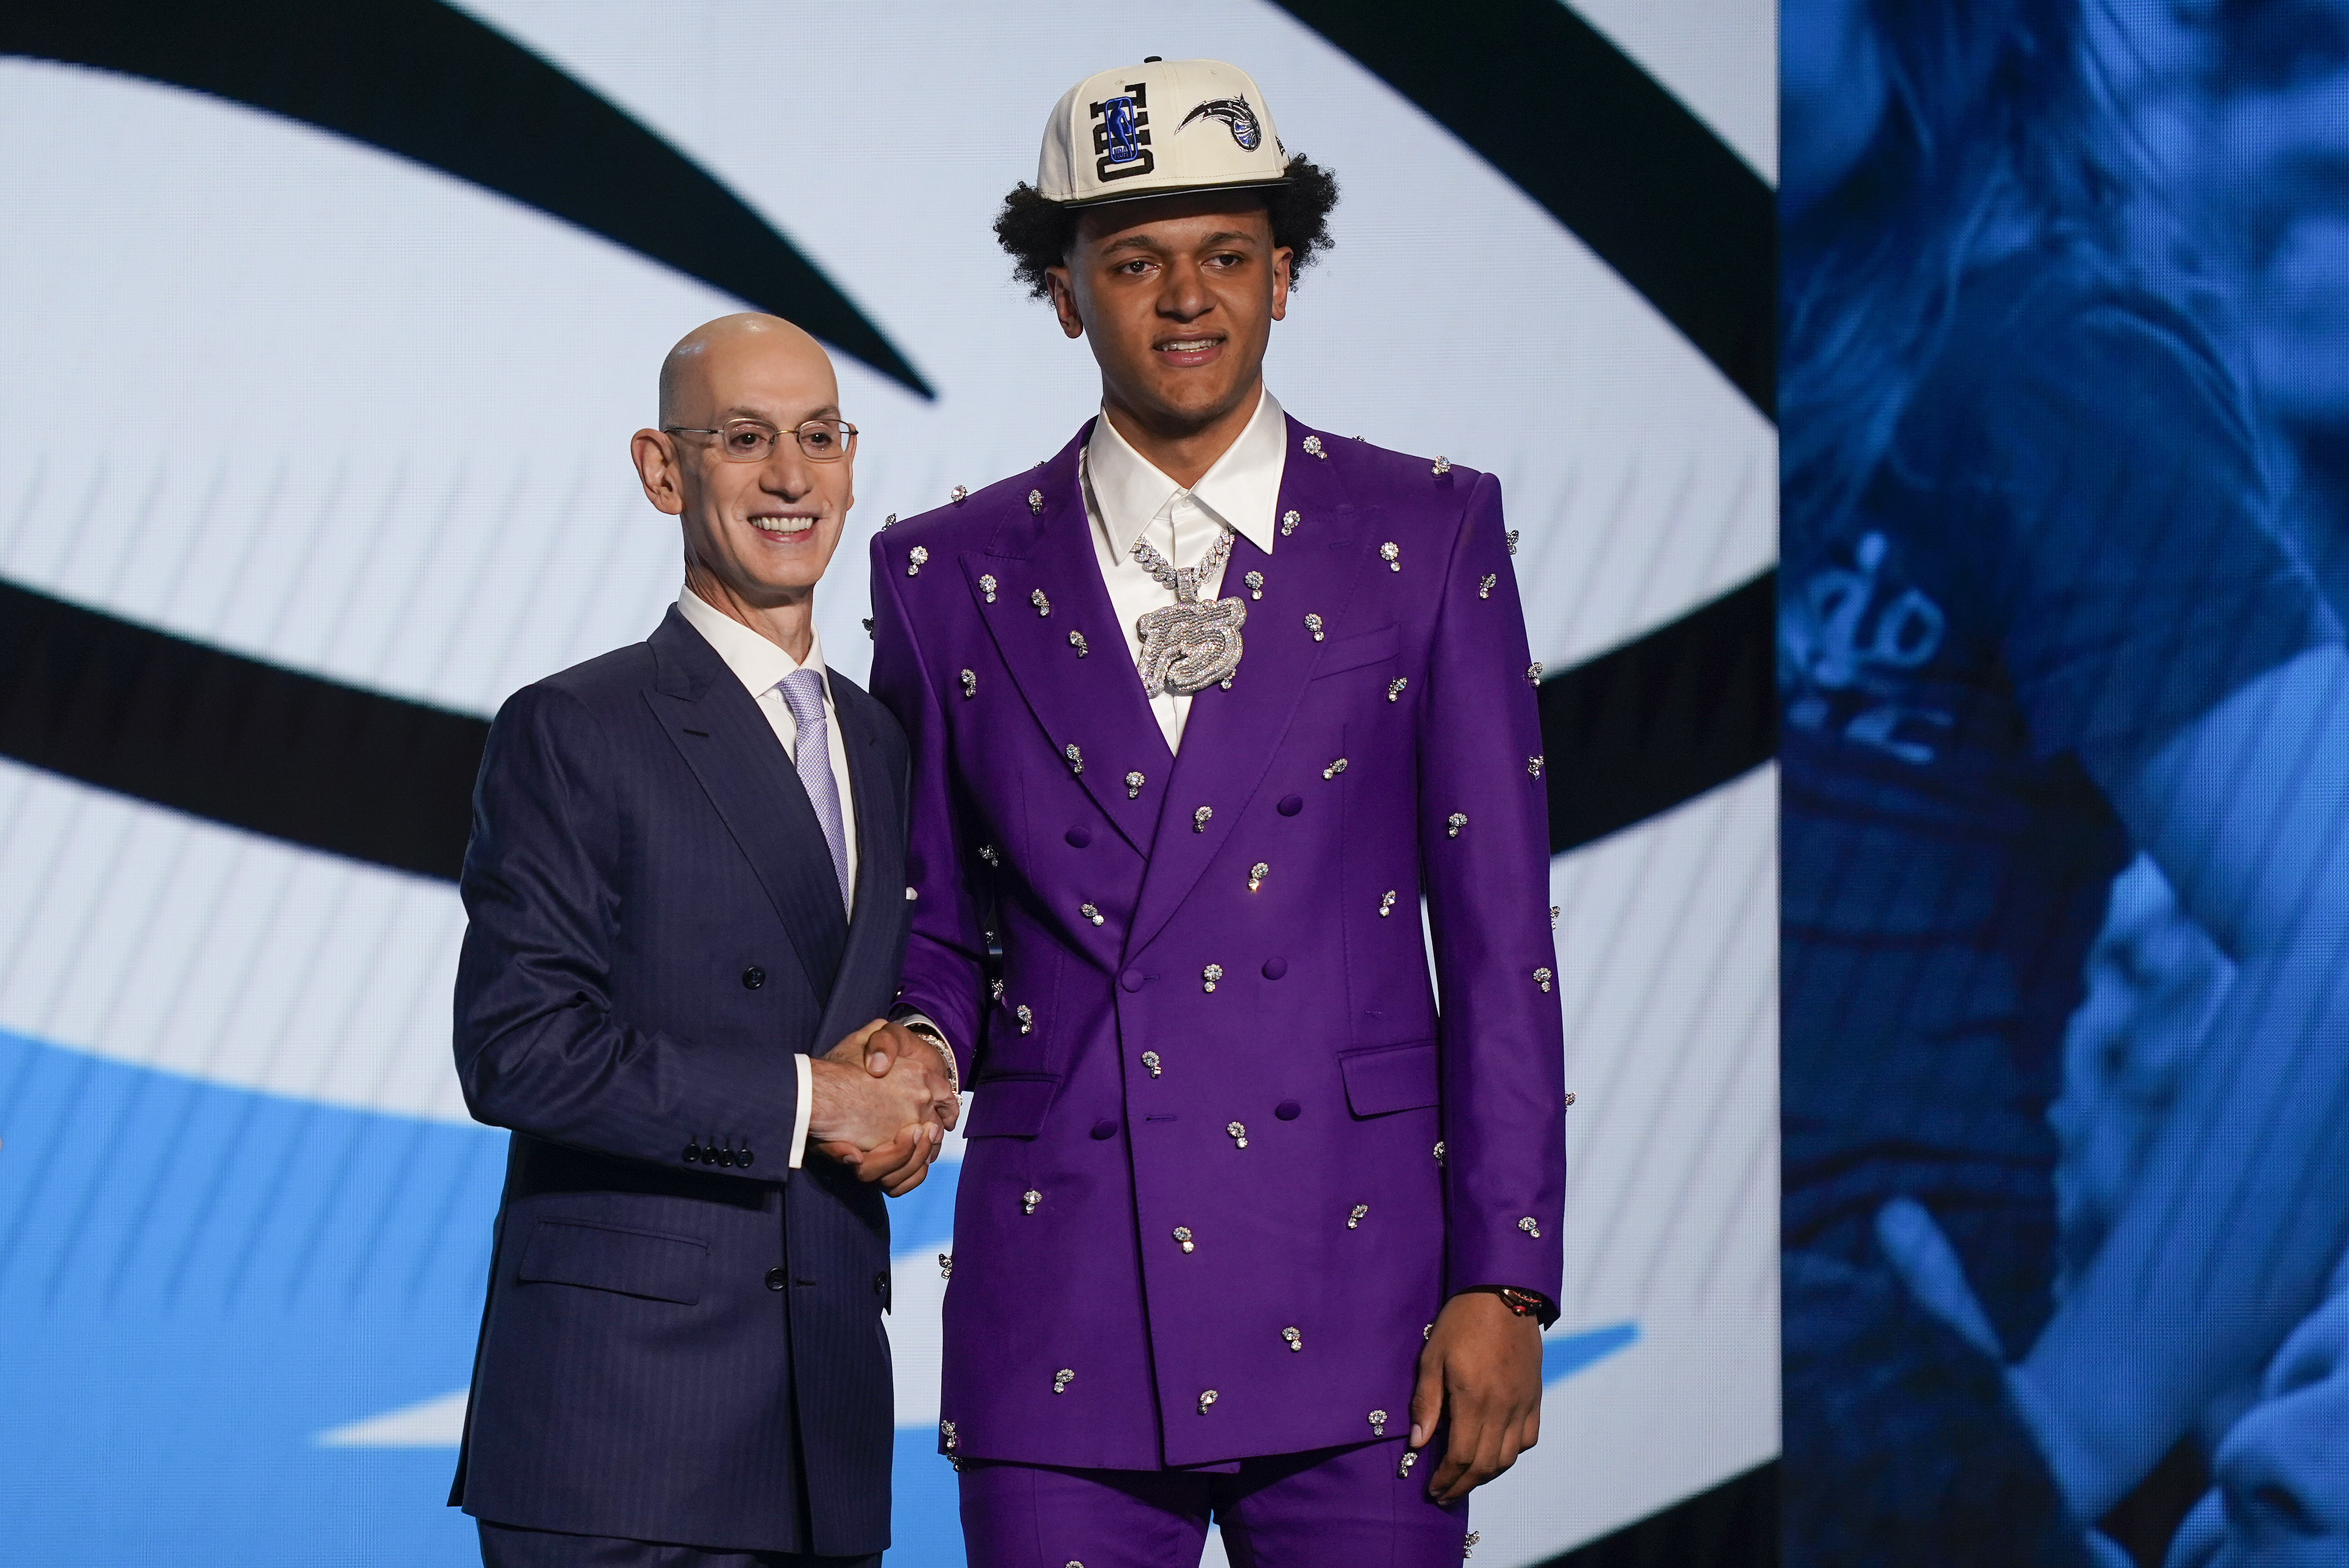 When it comes to the NBA draft, it's all in the suit - The Boston Globe